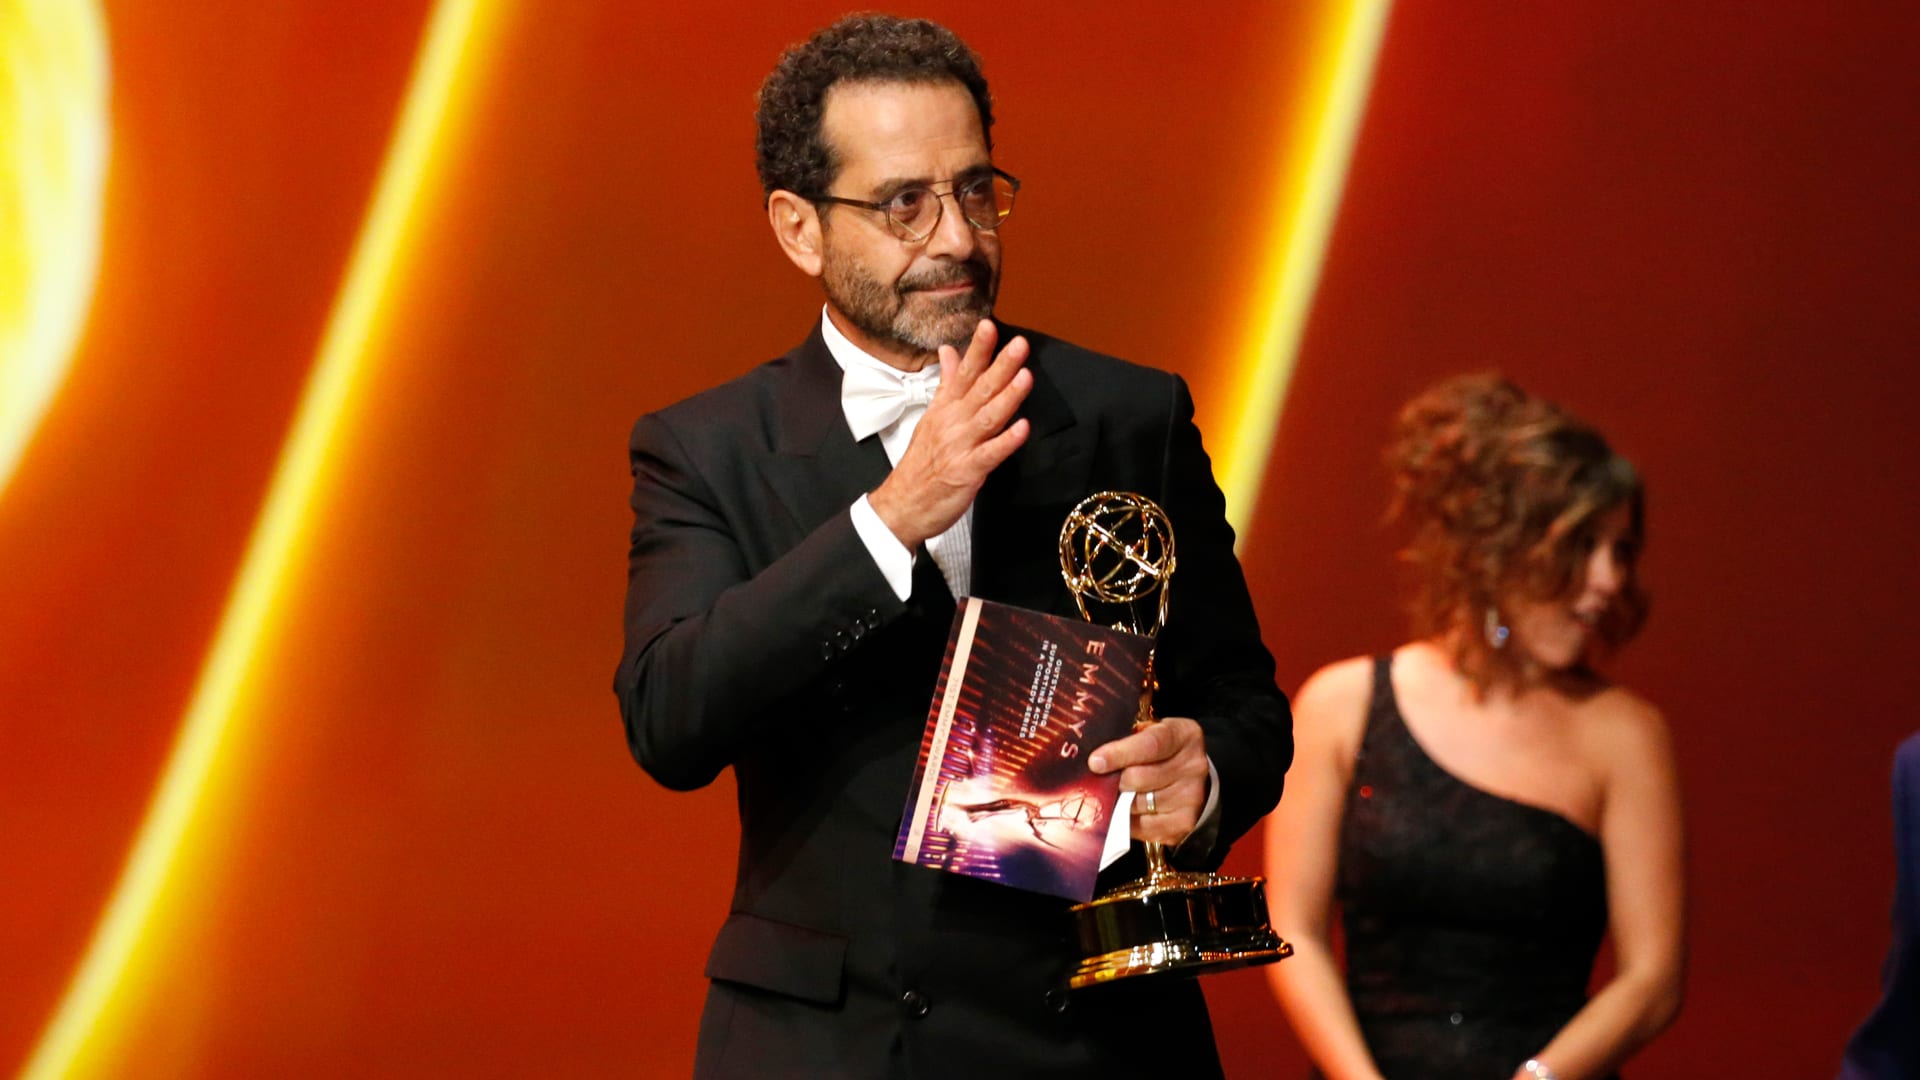 The 2019 Emmy Awards were a huge win for cord cutters and another loss for basic cable